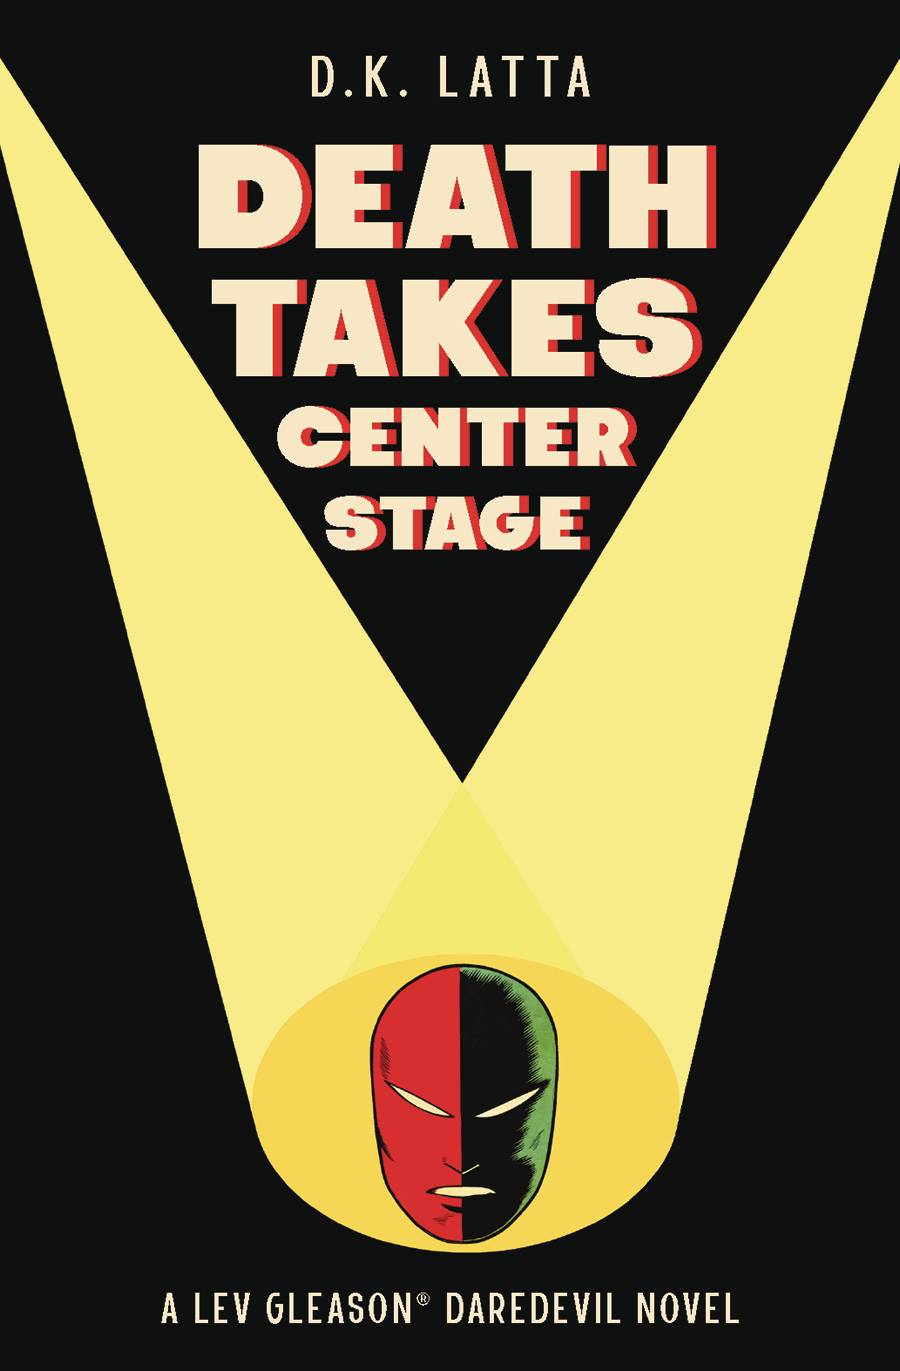 DEATH TAKES CENTER STAGE PAPERBACK (O/A)